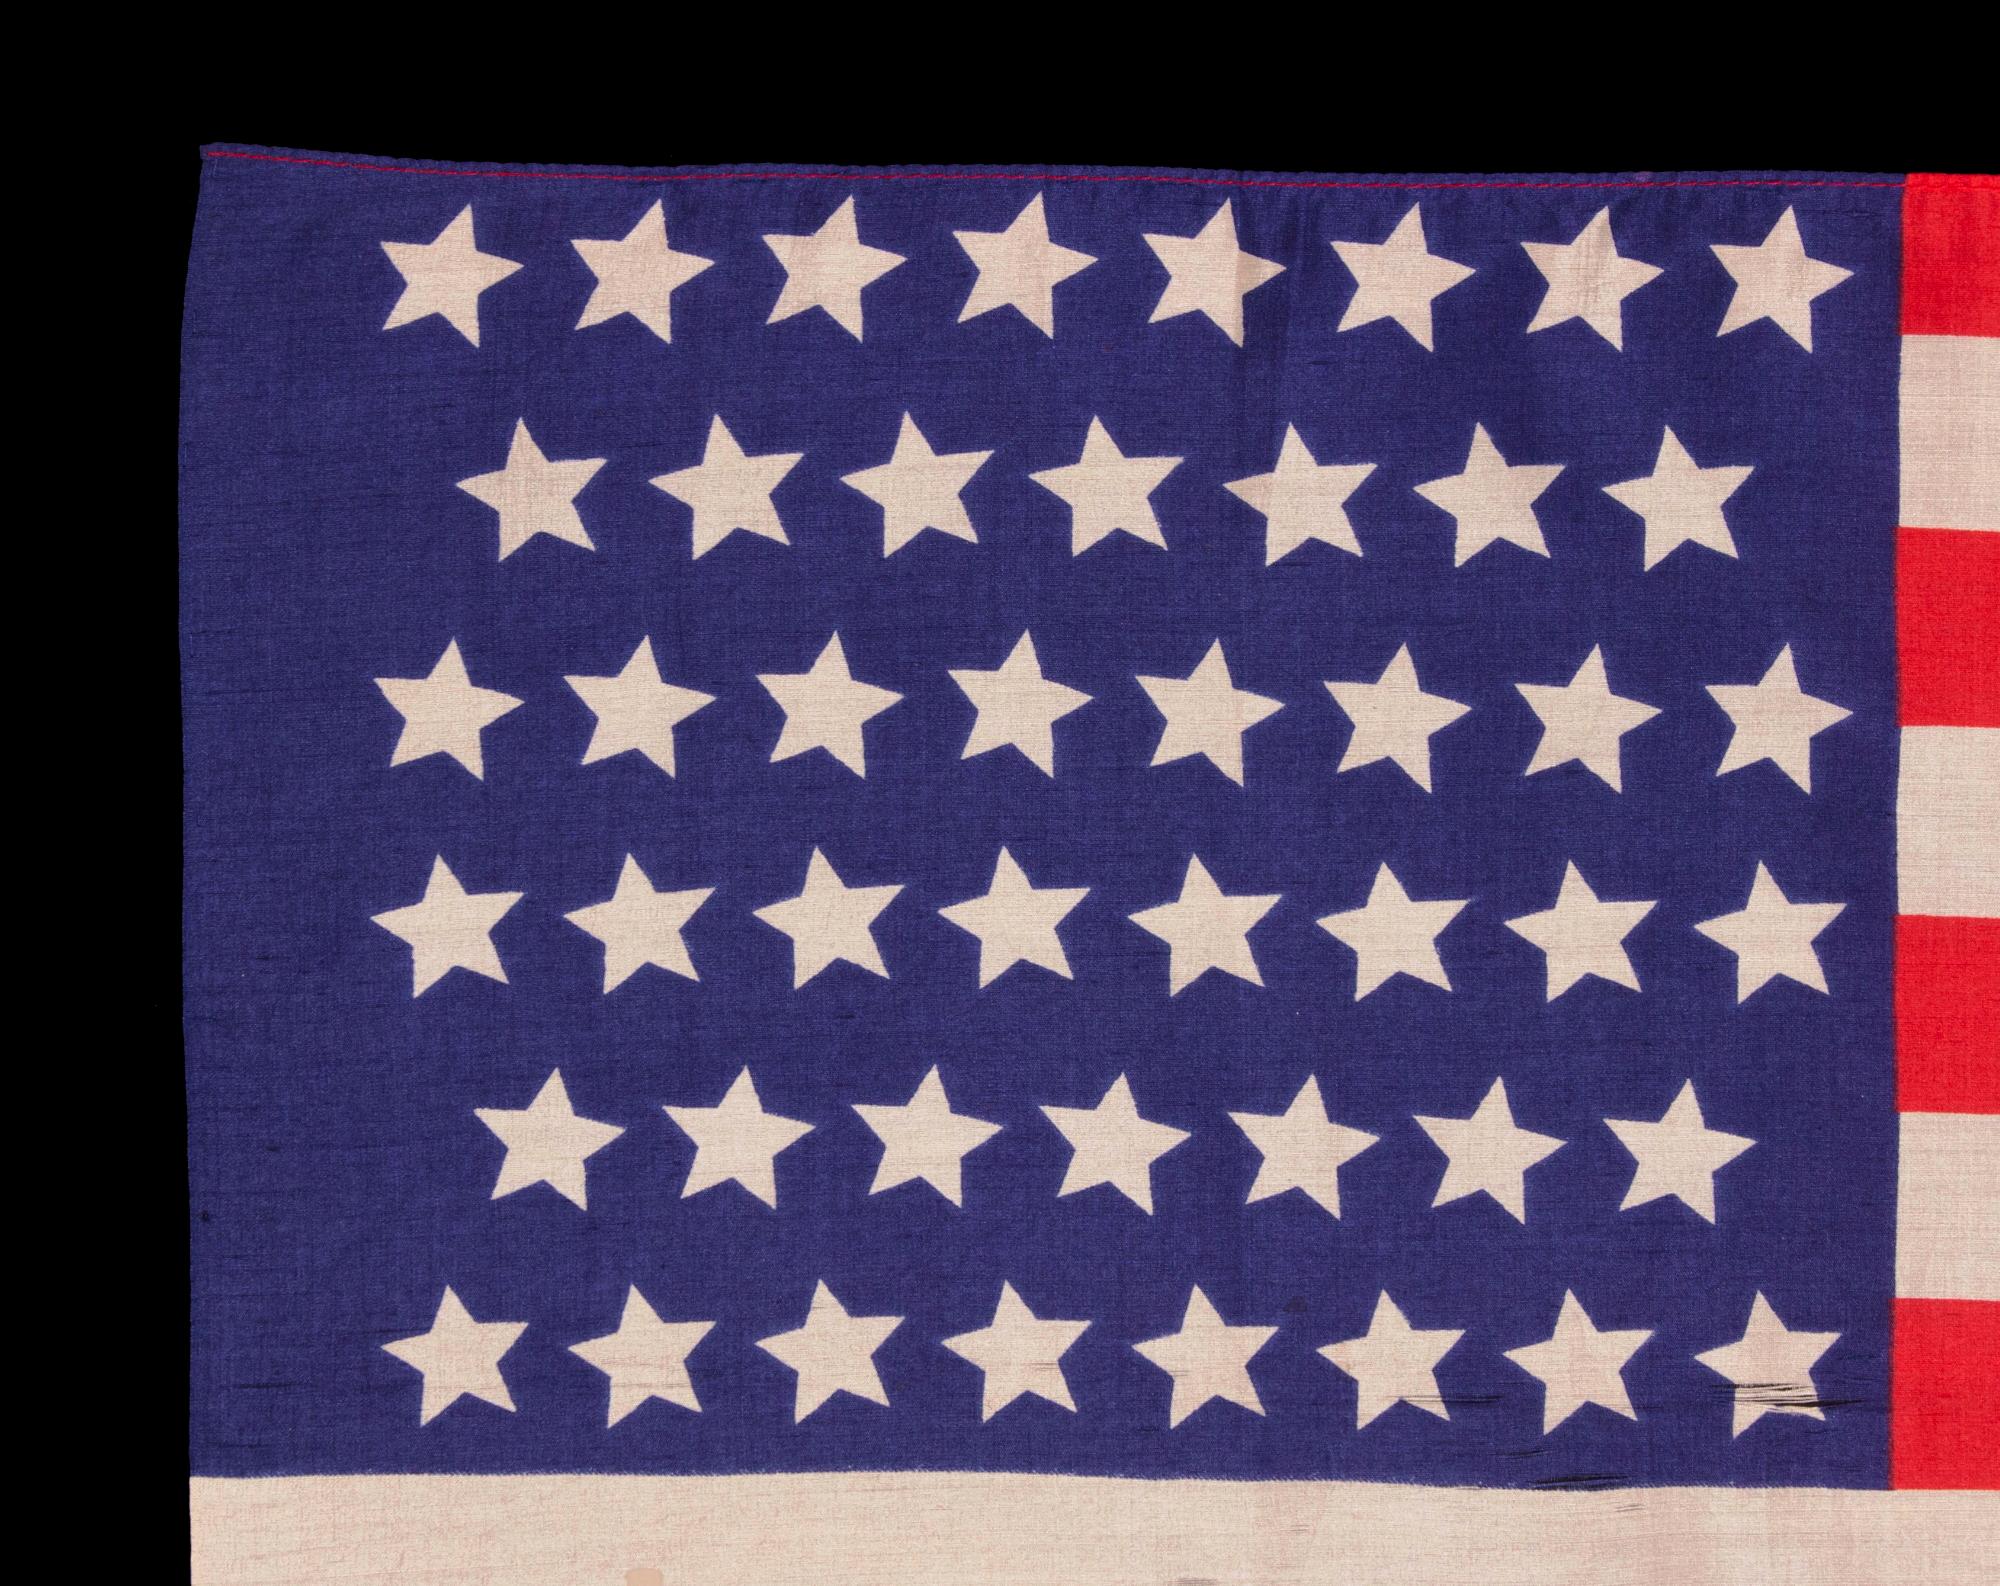 how many rows of stars are on the american flag